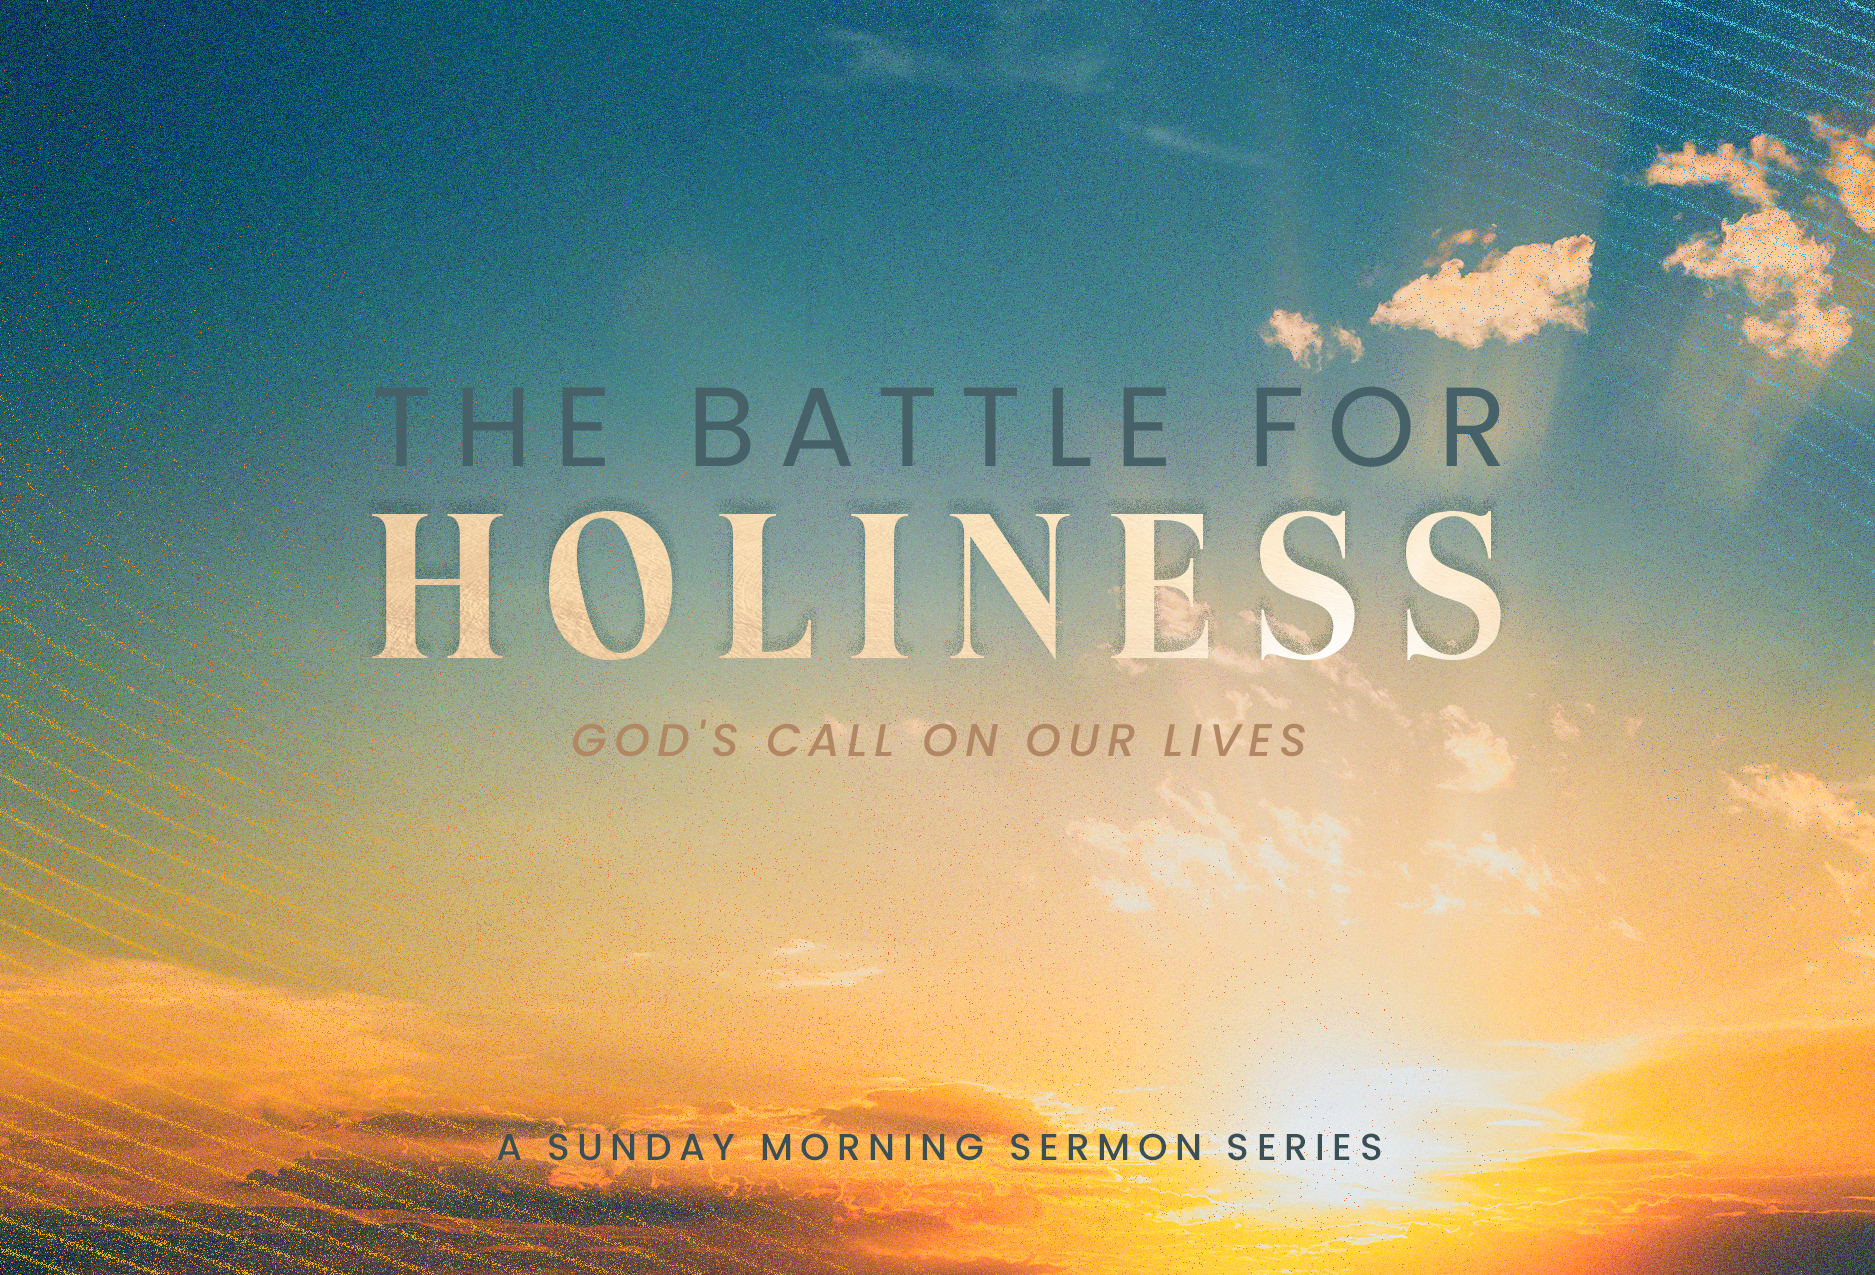 The Battle For Holiness | The Spirit is Speaking to the Churches